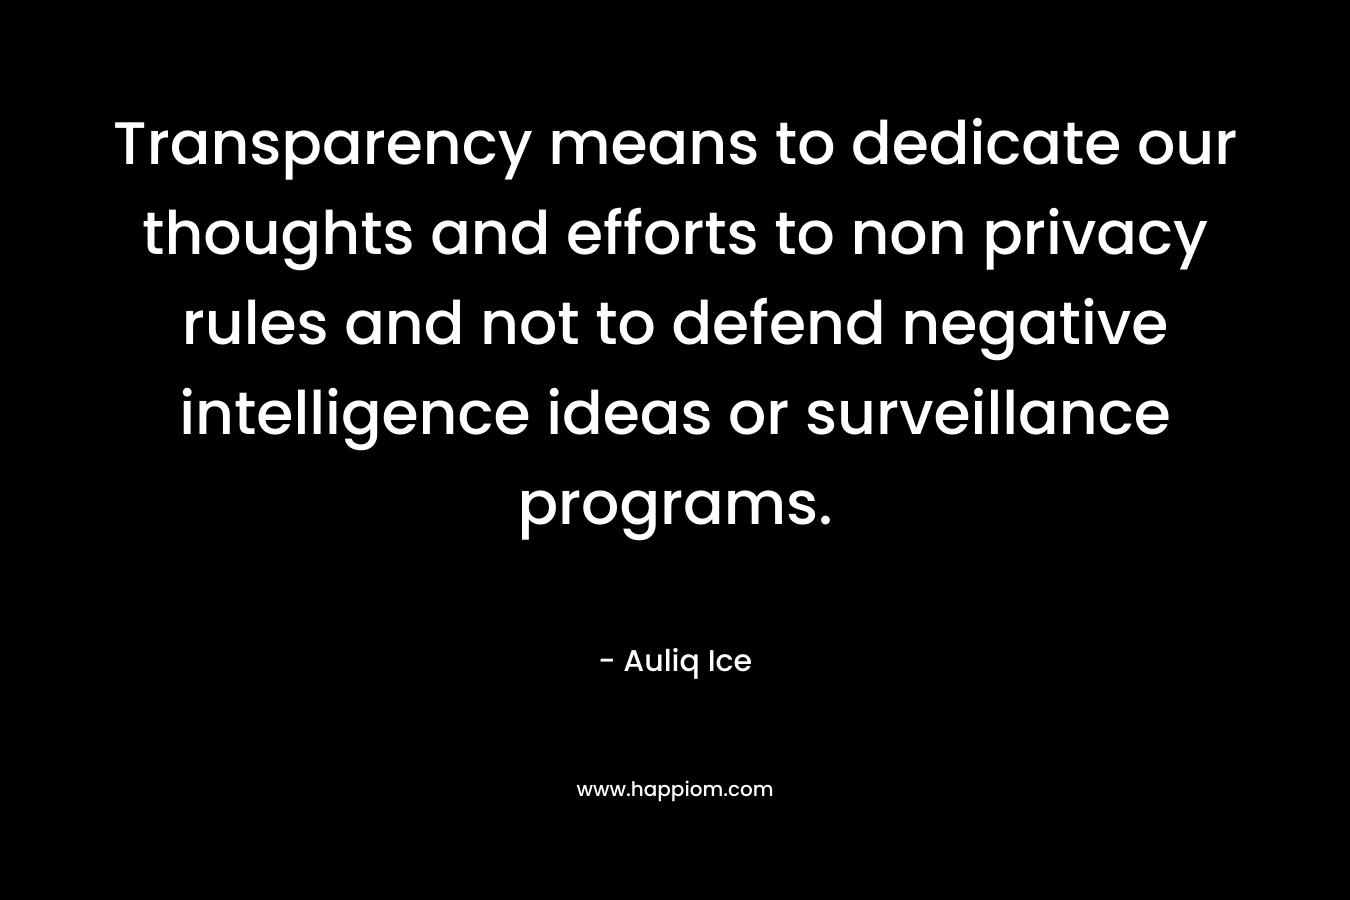 Transparency means to dedicate our thoughts and efforts to non privacy rules and not to defend negative intelligence ideas or surveillance programs. – Auliq Ice